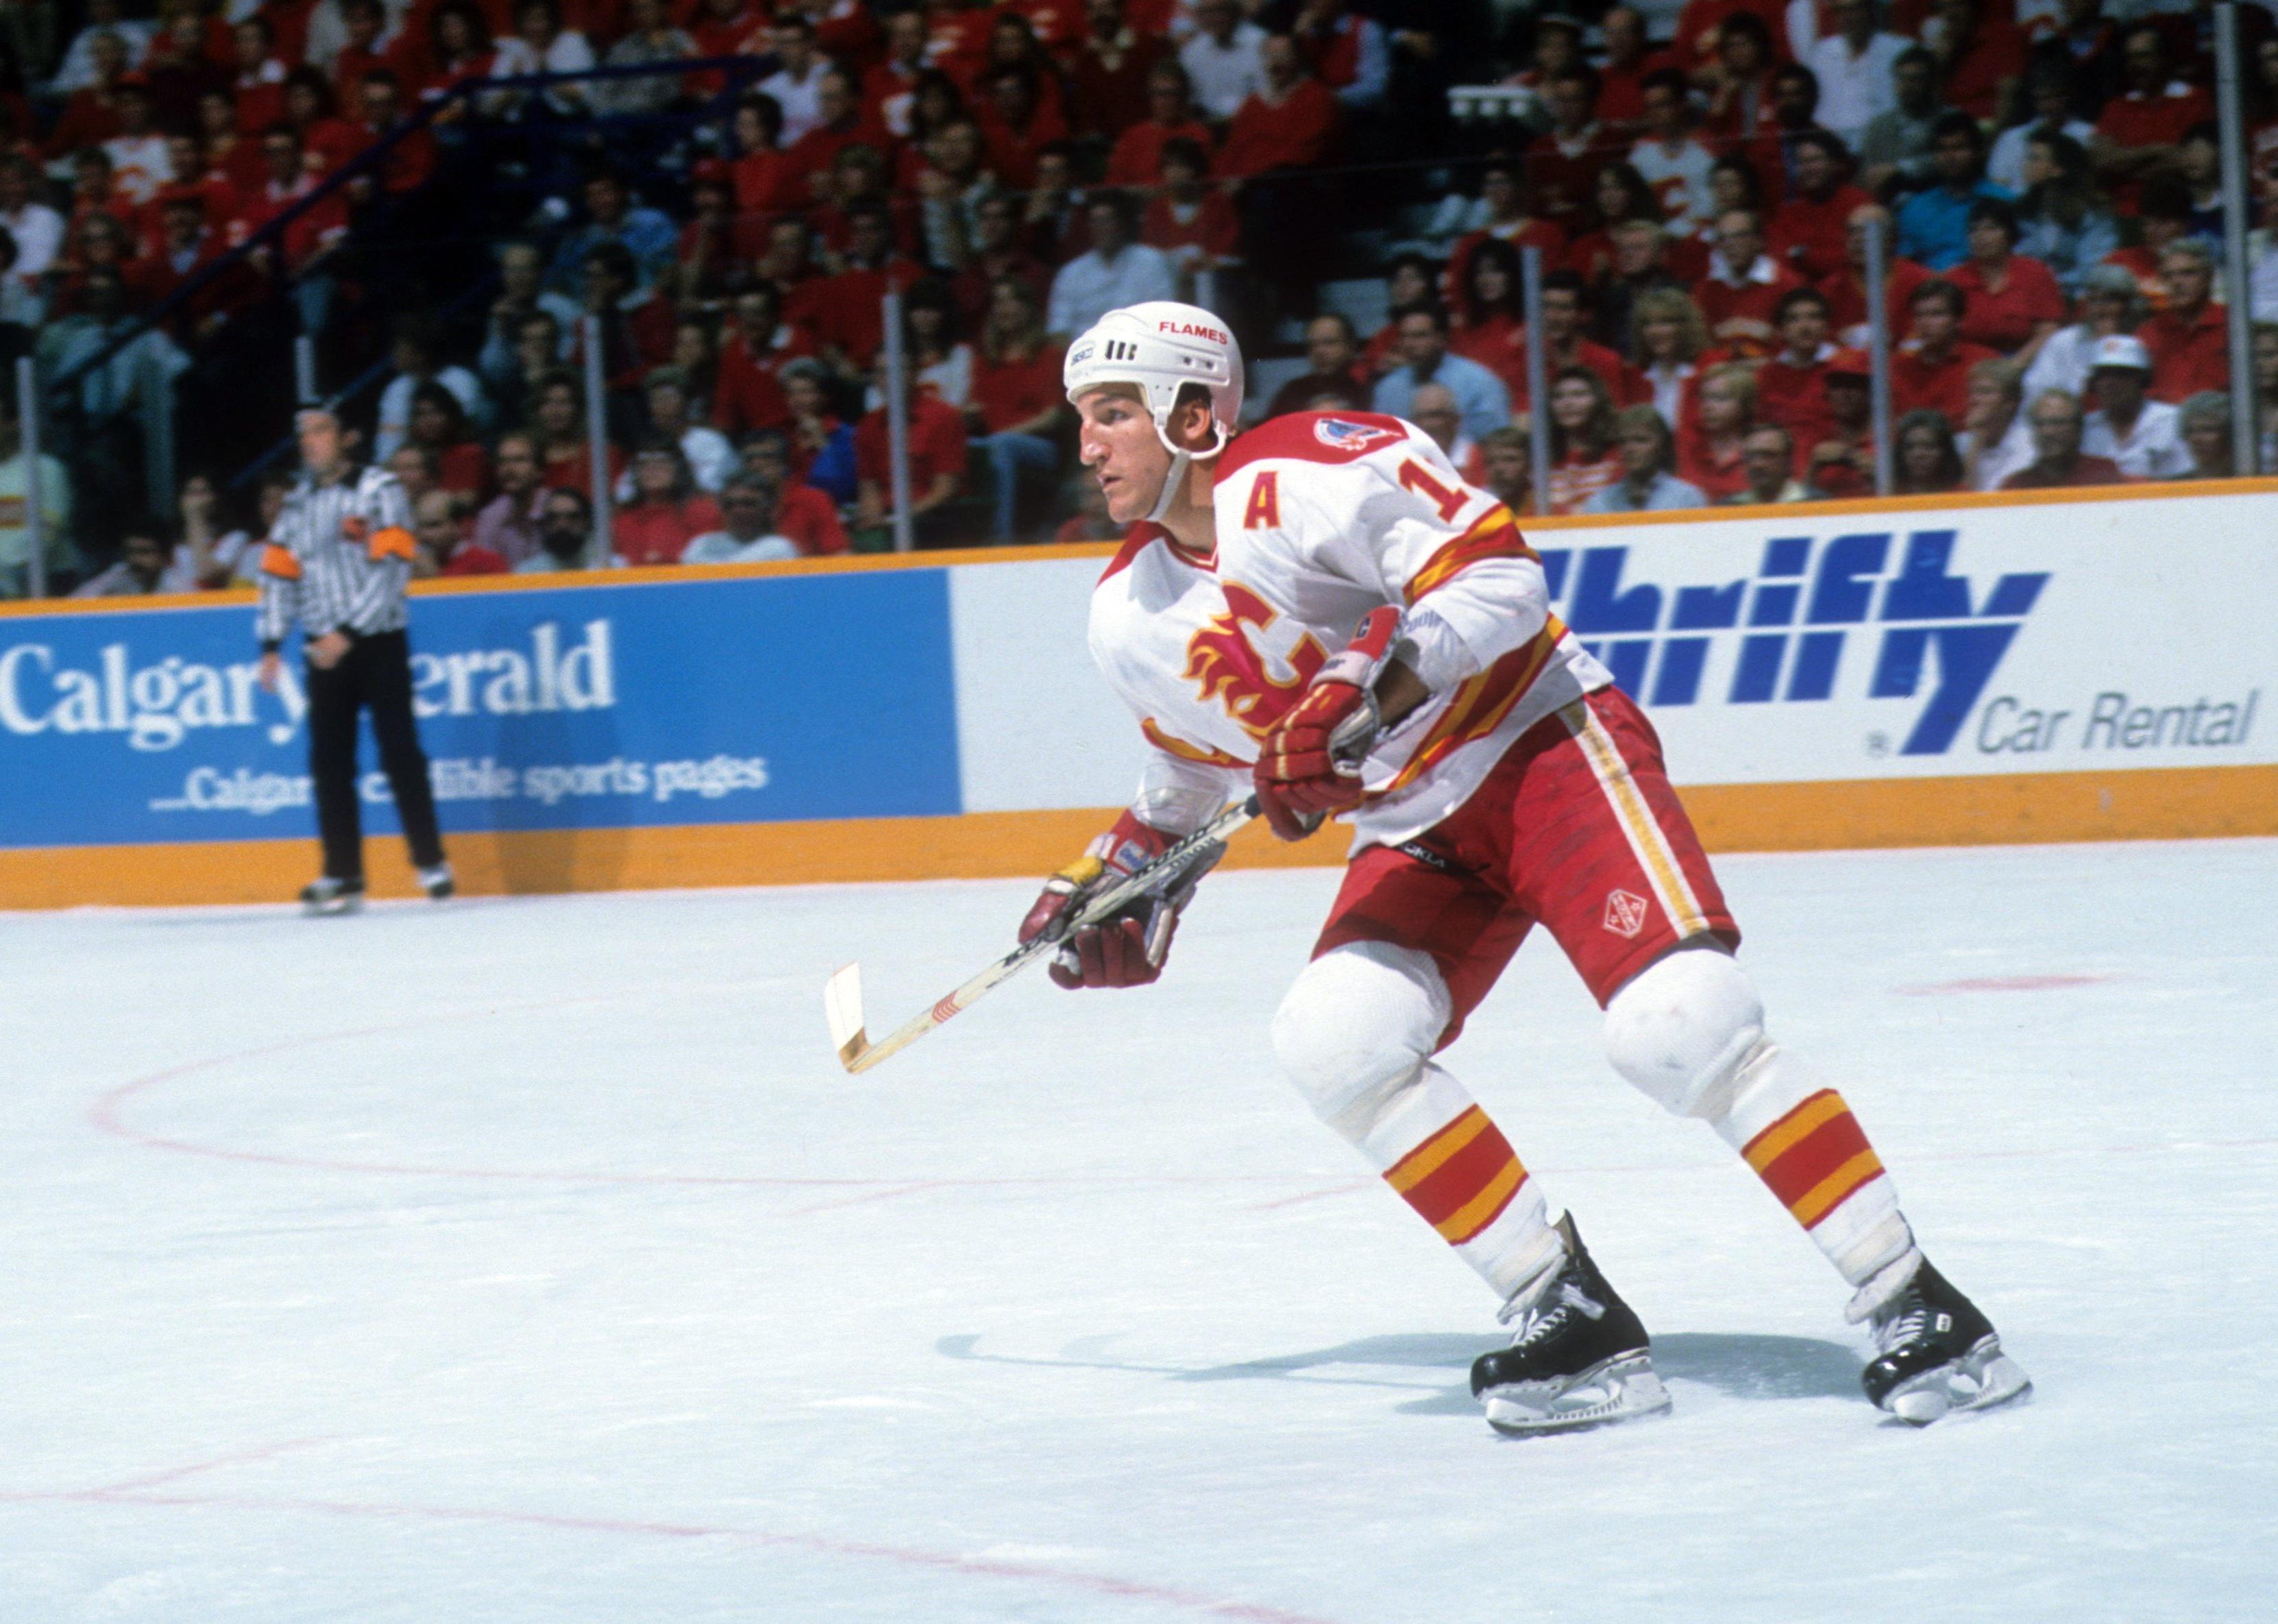 Tim Hunter skates on the ice during the 1989 Stanley Cup Finals.